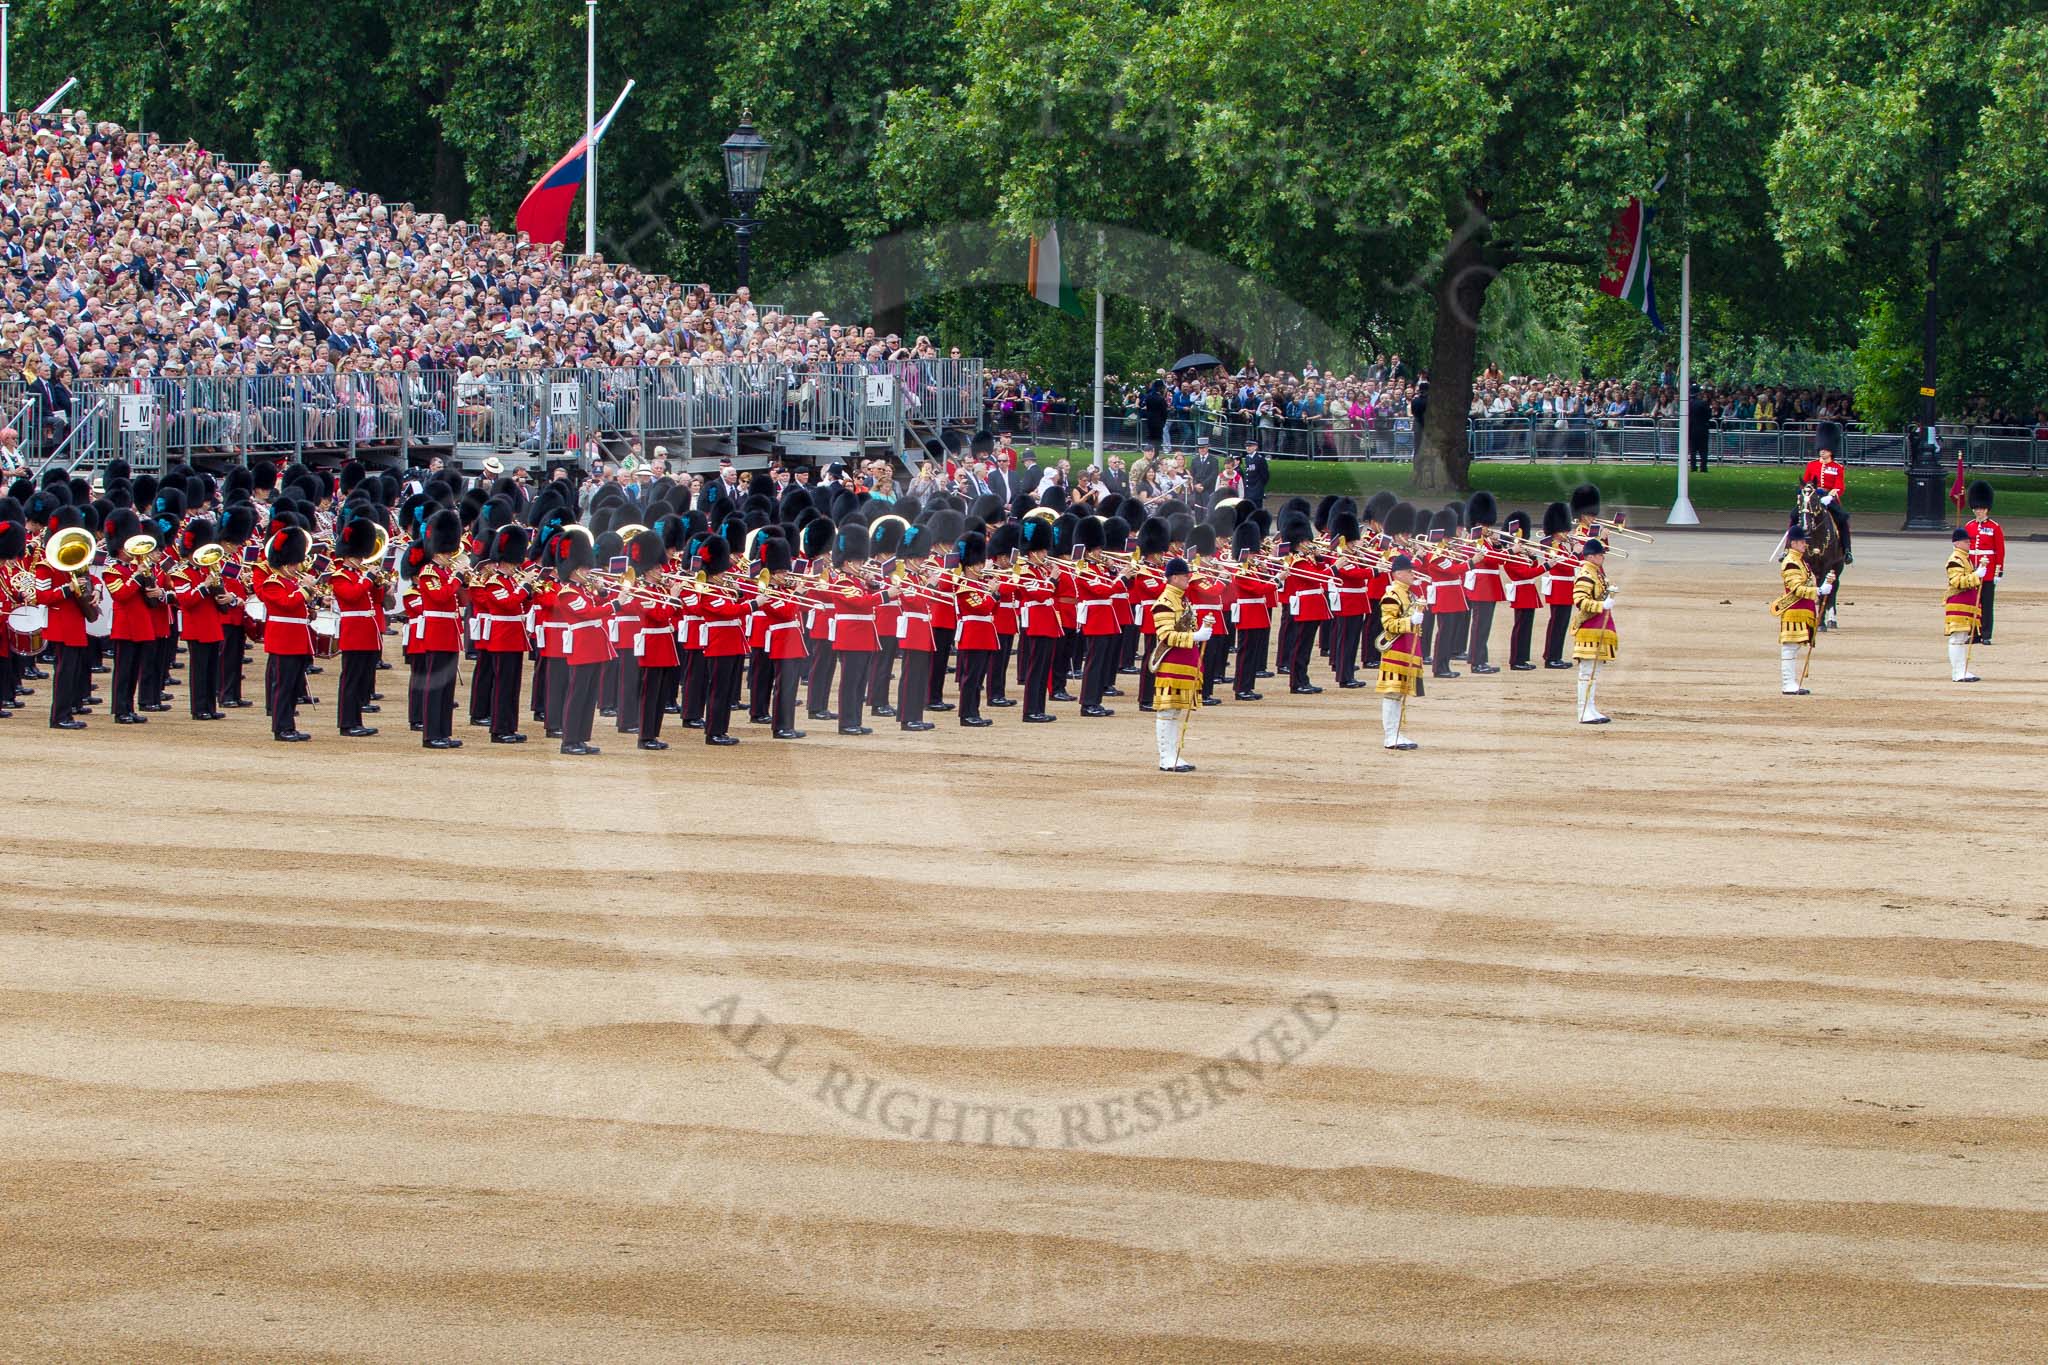 Trooping the Colour 2014.
Horse Guards Parade, Westminster,
London SW1A,

United Kingdom,
on 14 June 2014 at 11:28, image #571